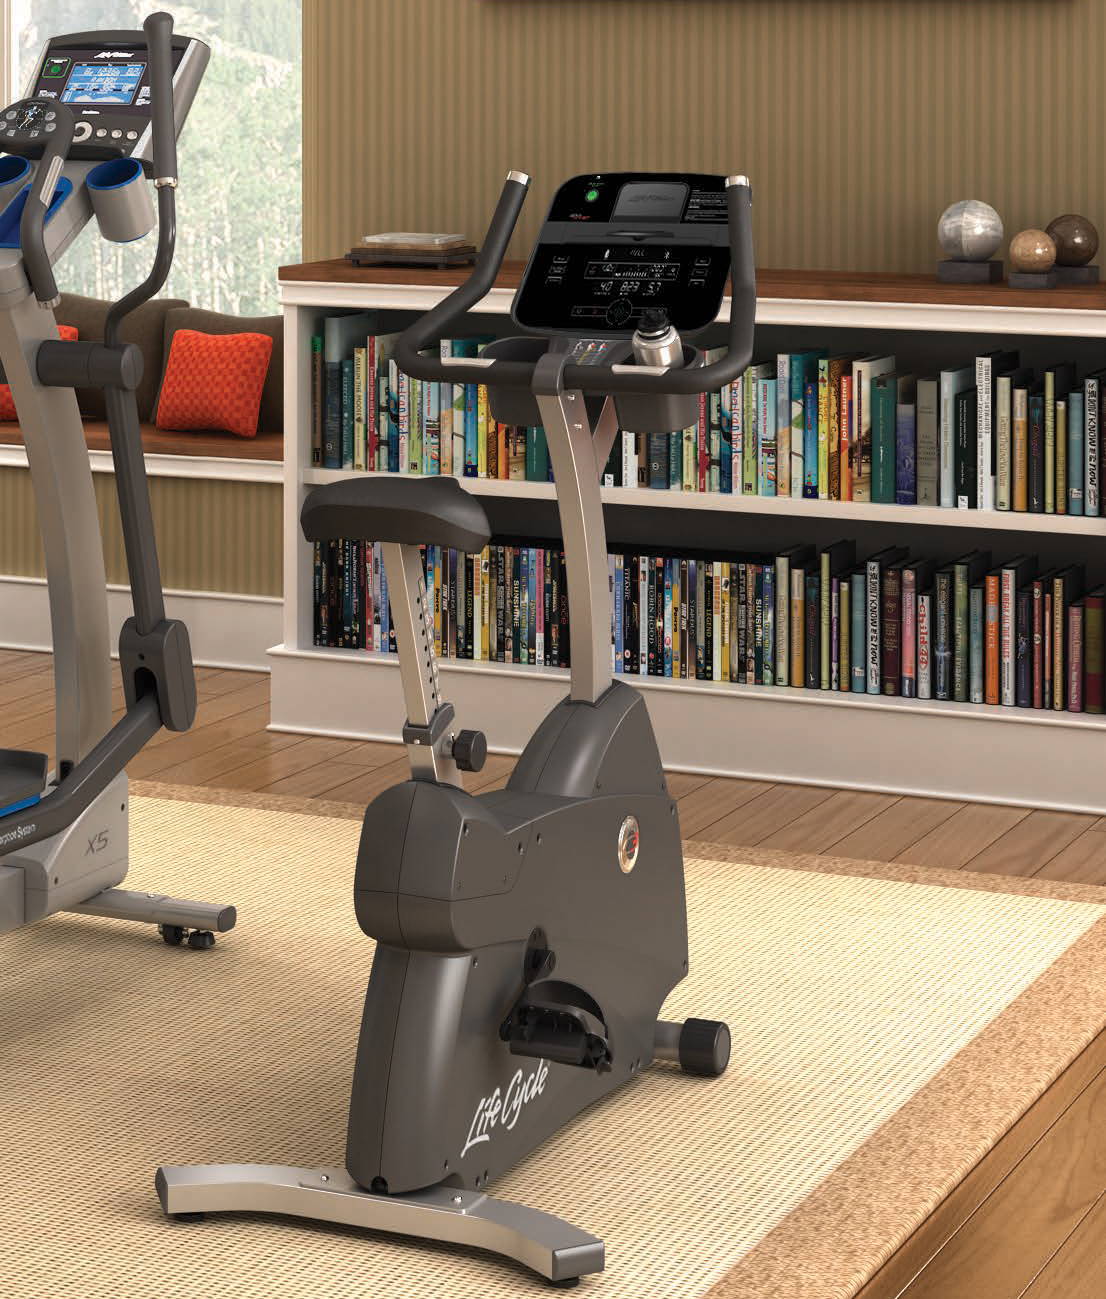 C3 Lifecycle exercise bike next to other fitness equipment in home